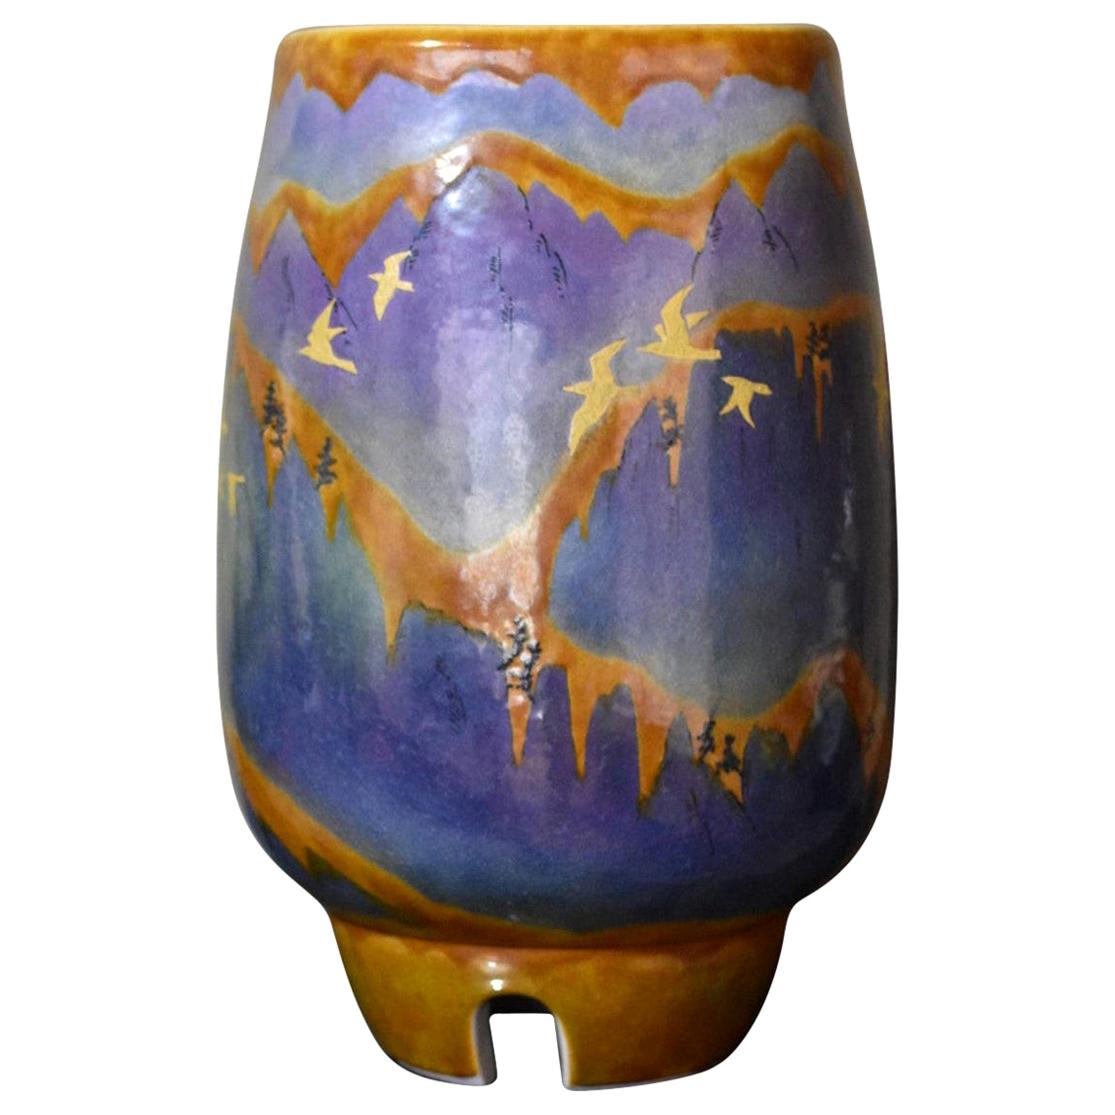 Blue Yellow Porcelain Vase by Contemporary Japanese Master Artist